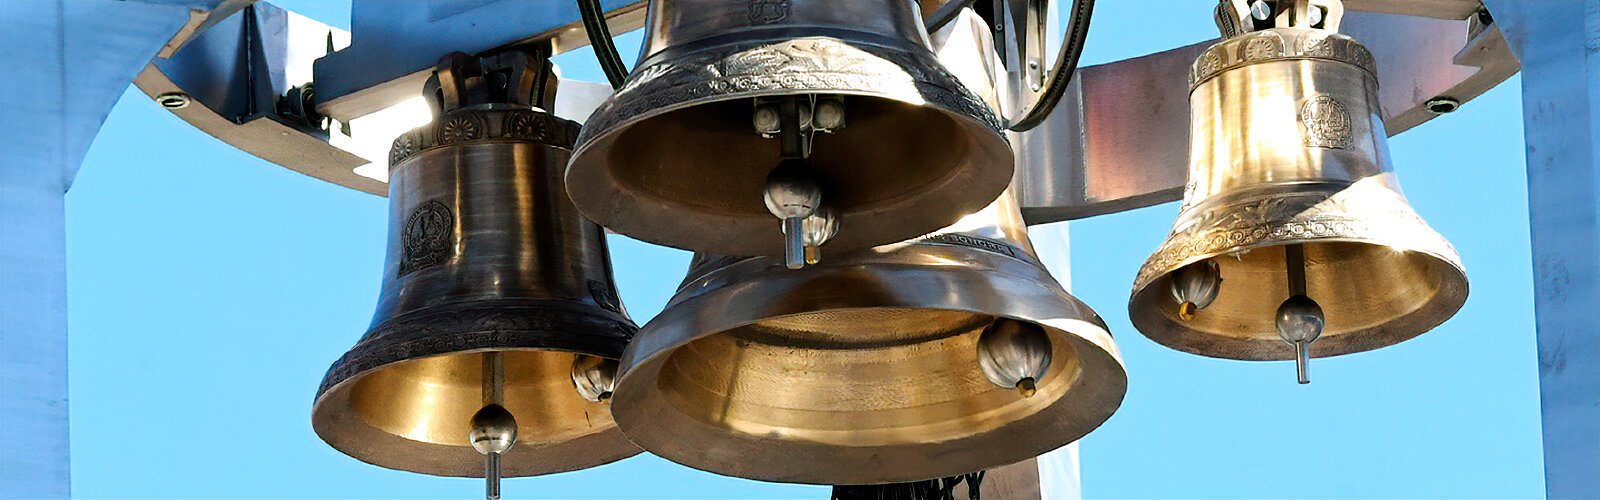 Because of their unequaled musicality, unique profile, exacting copper/tin mixture of bronze and tuning perfection, the Paccard bells are considered the Stradivarius of bells. Each Ars Sonora bell is designed to play a specific note.